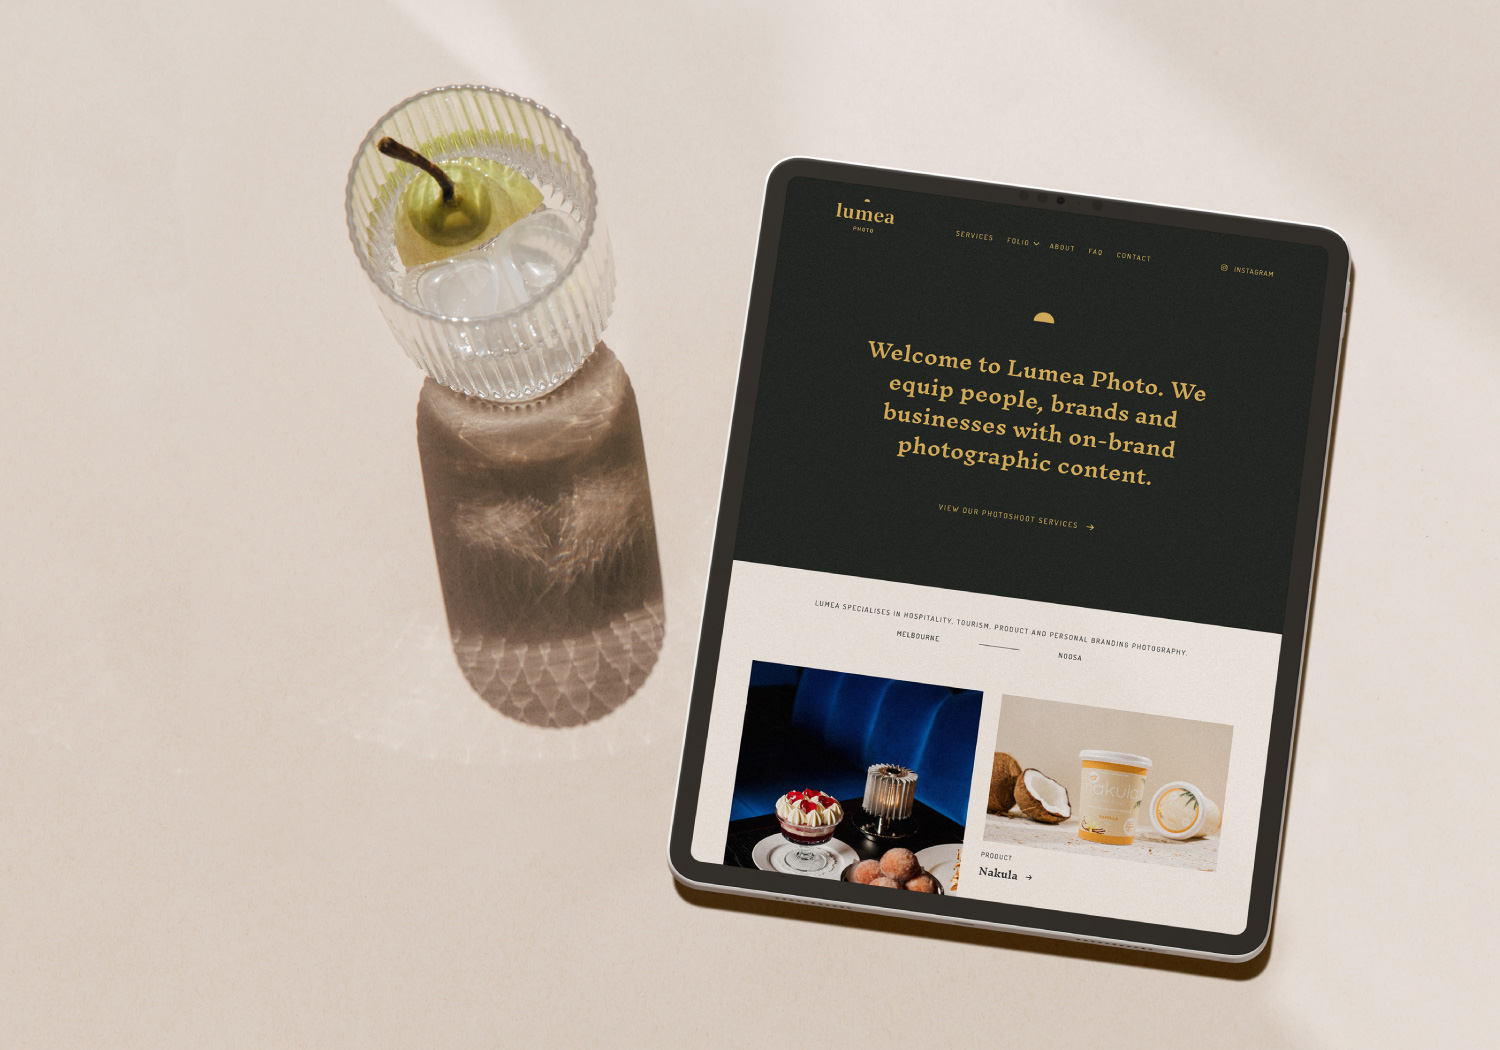 A crystal glass of water and an ipad. The ipad shows the website homepage design for Lumea Photo